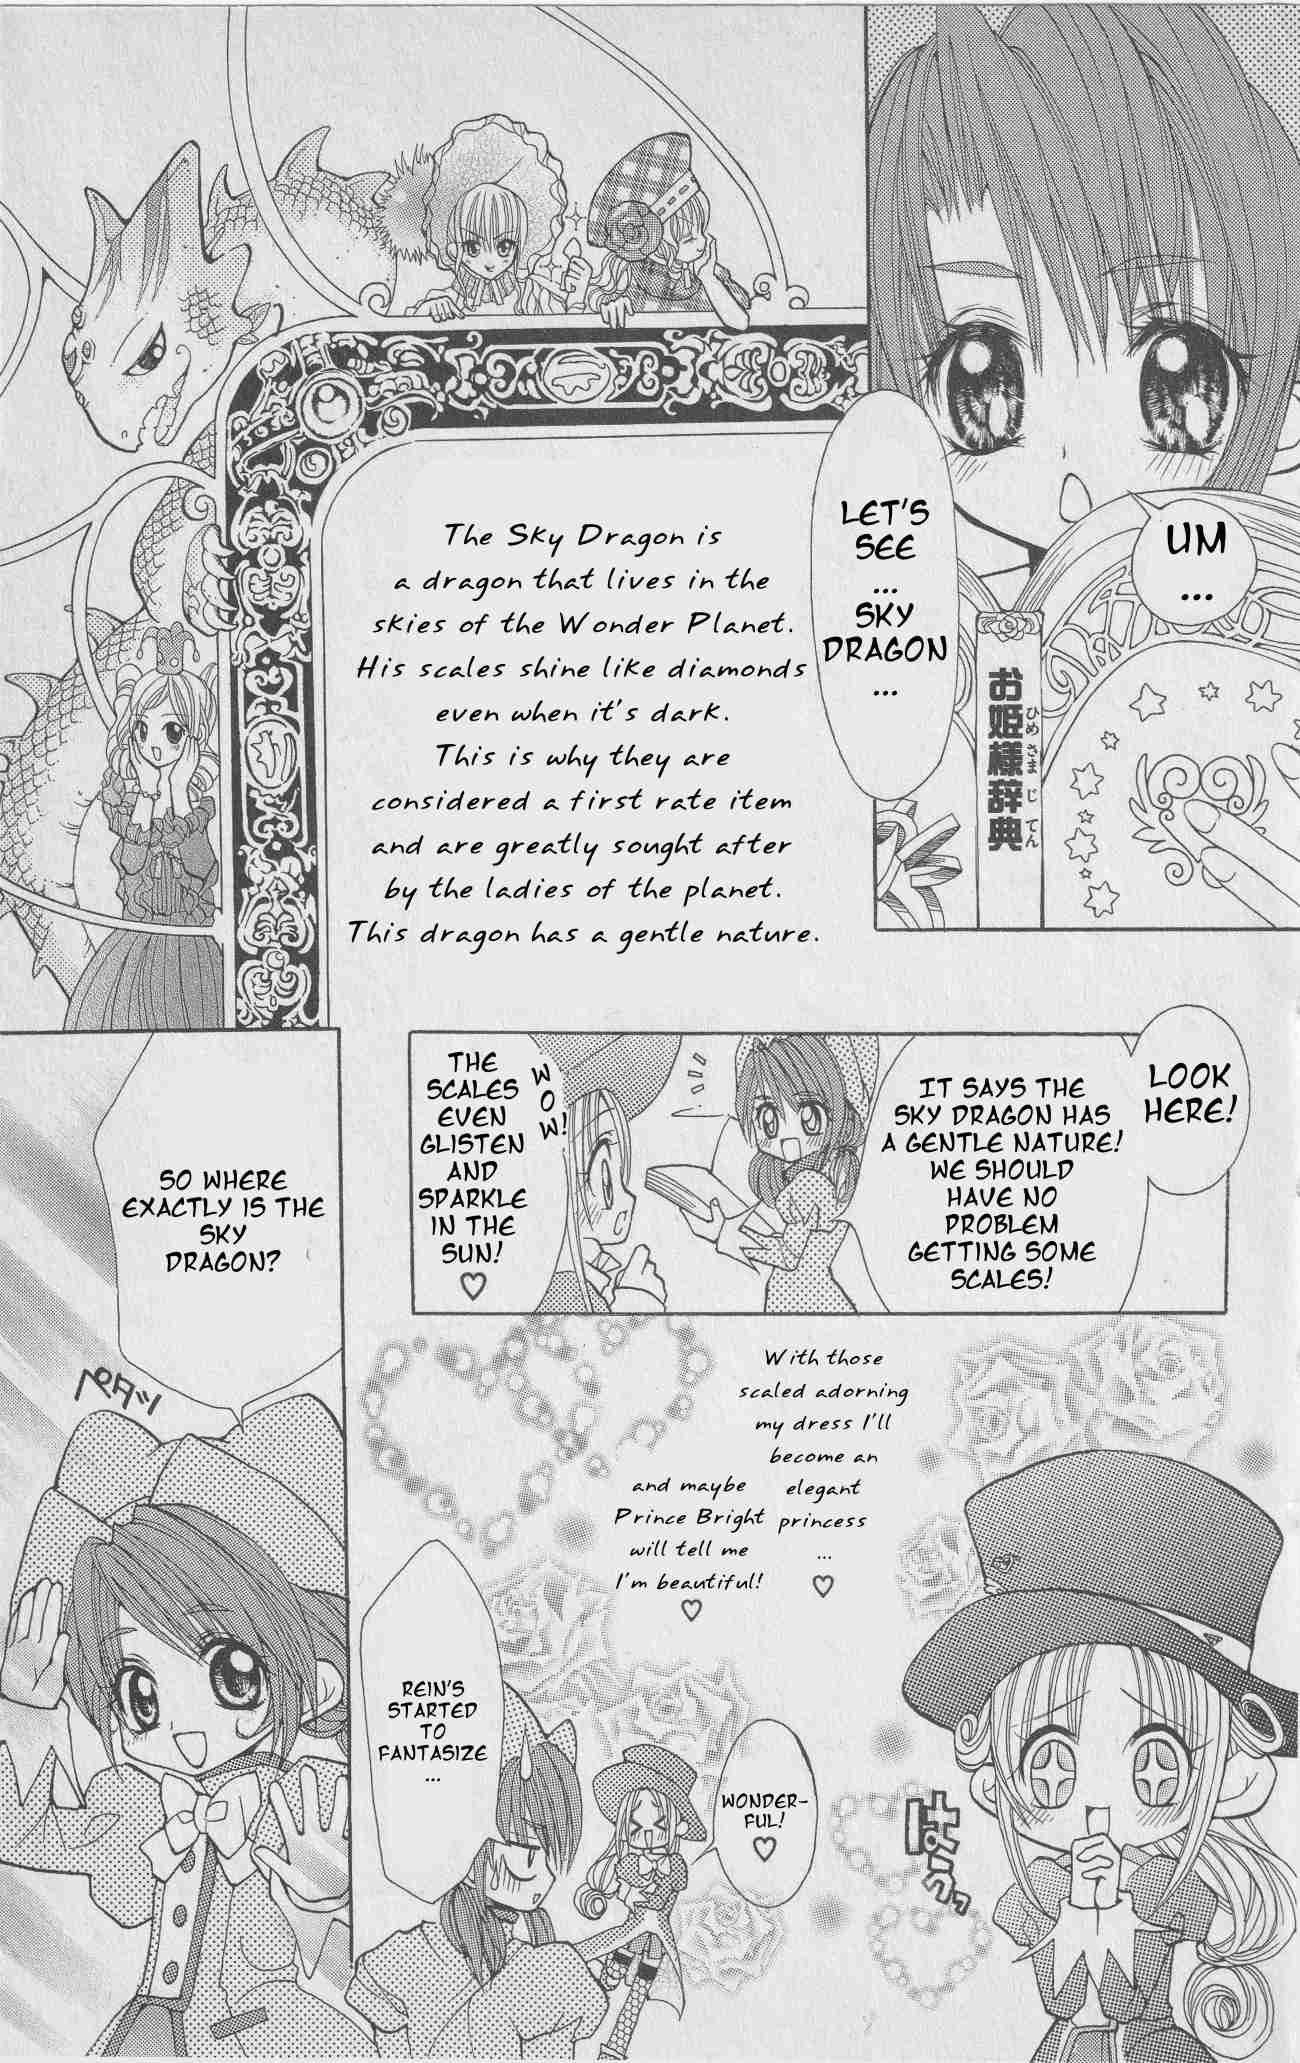 The Twin Princesses of the Wonder Planet: Lovely Kingdom Vol. 1 Ch. 2